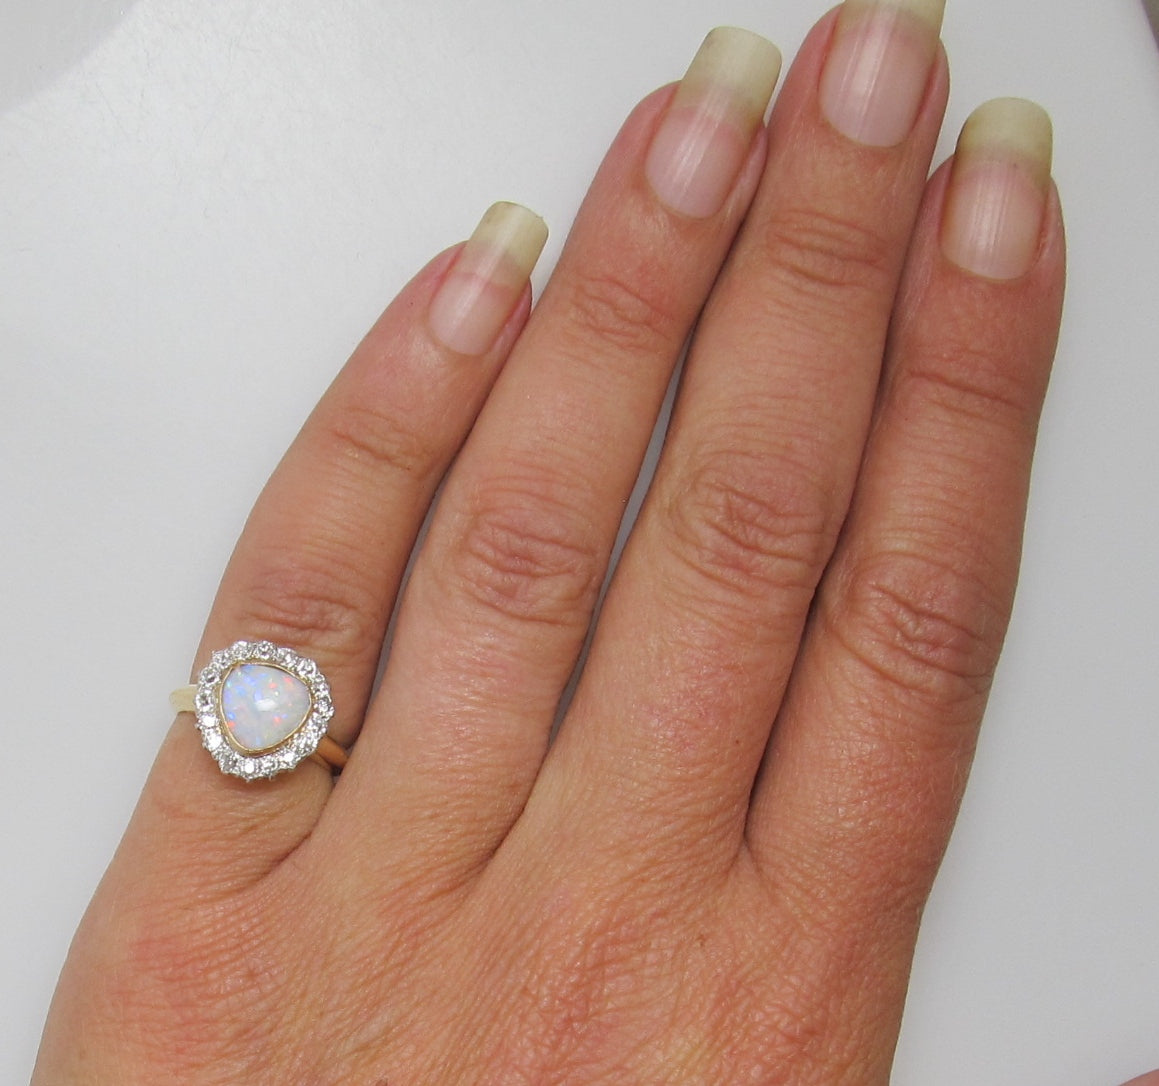 Antique 14k gold ring with opal and diamond